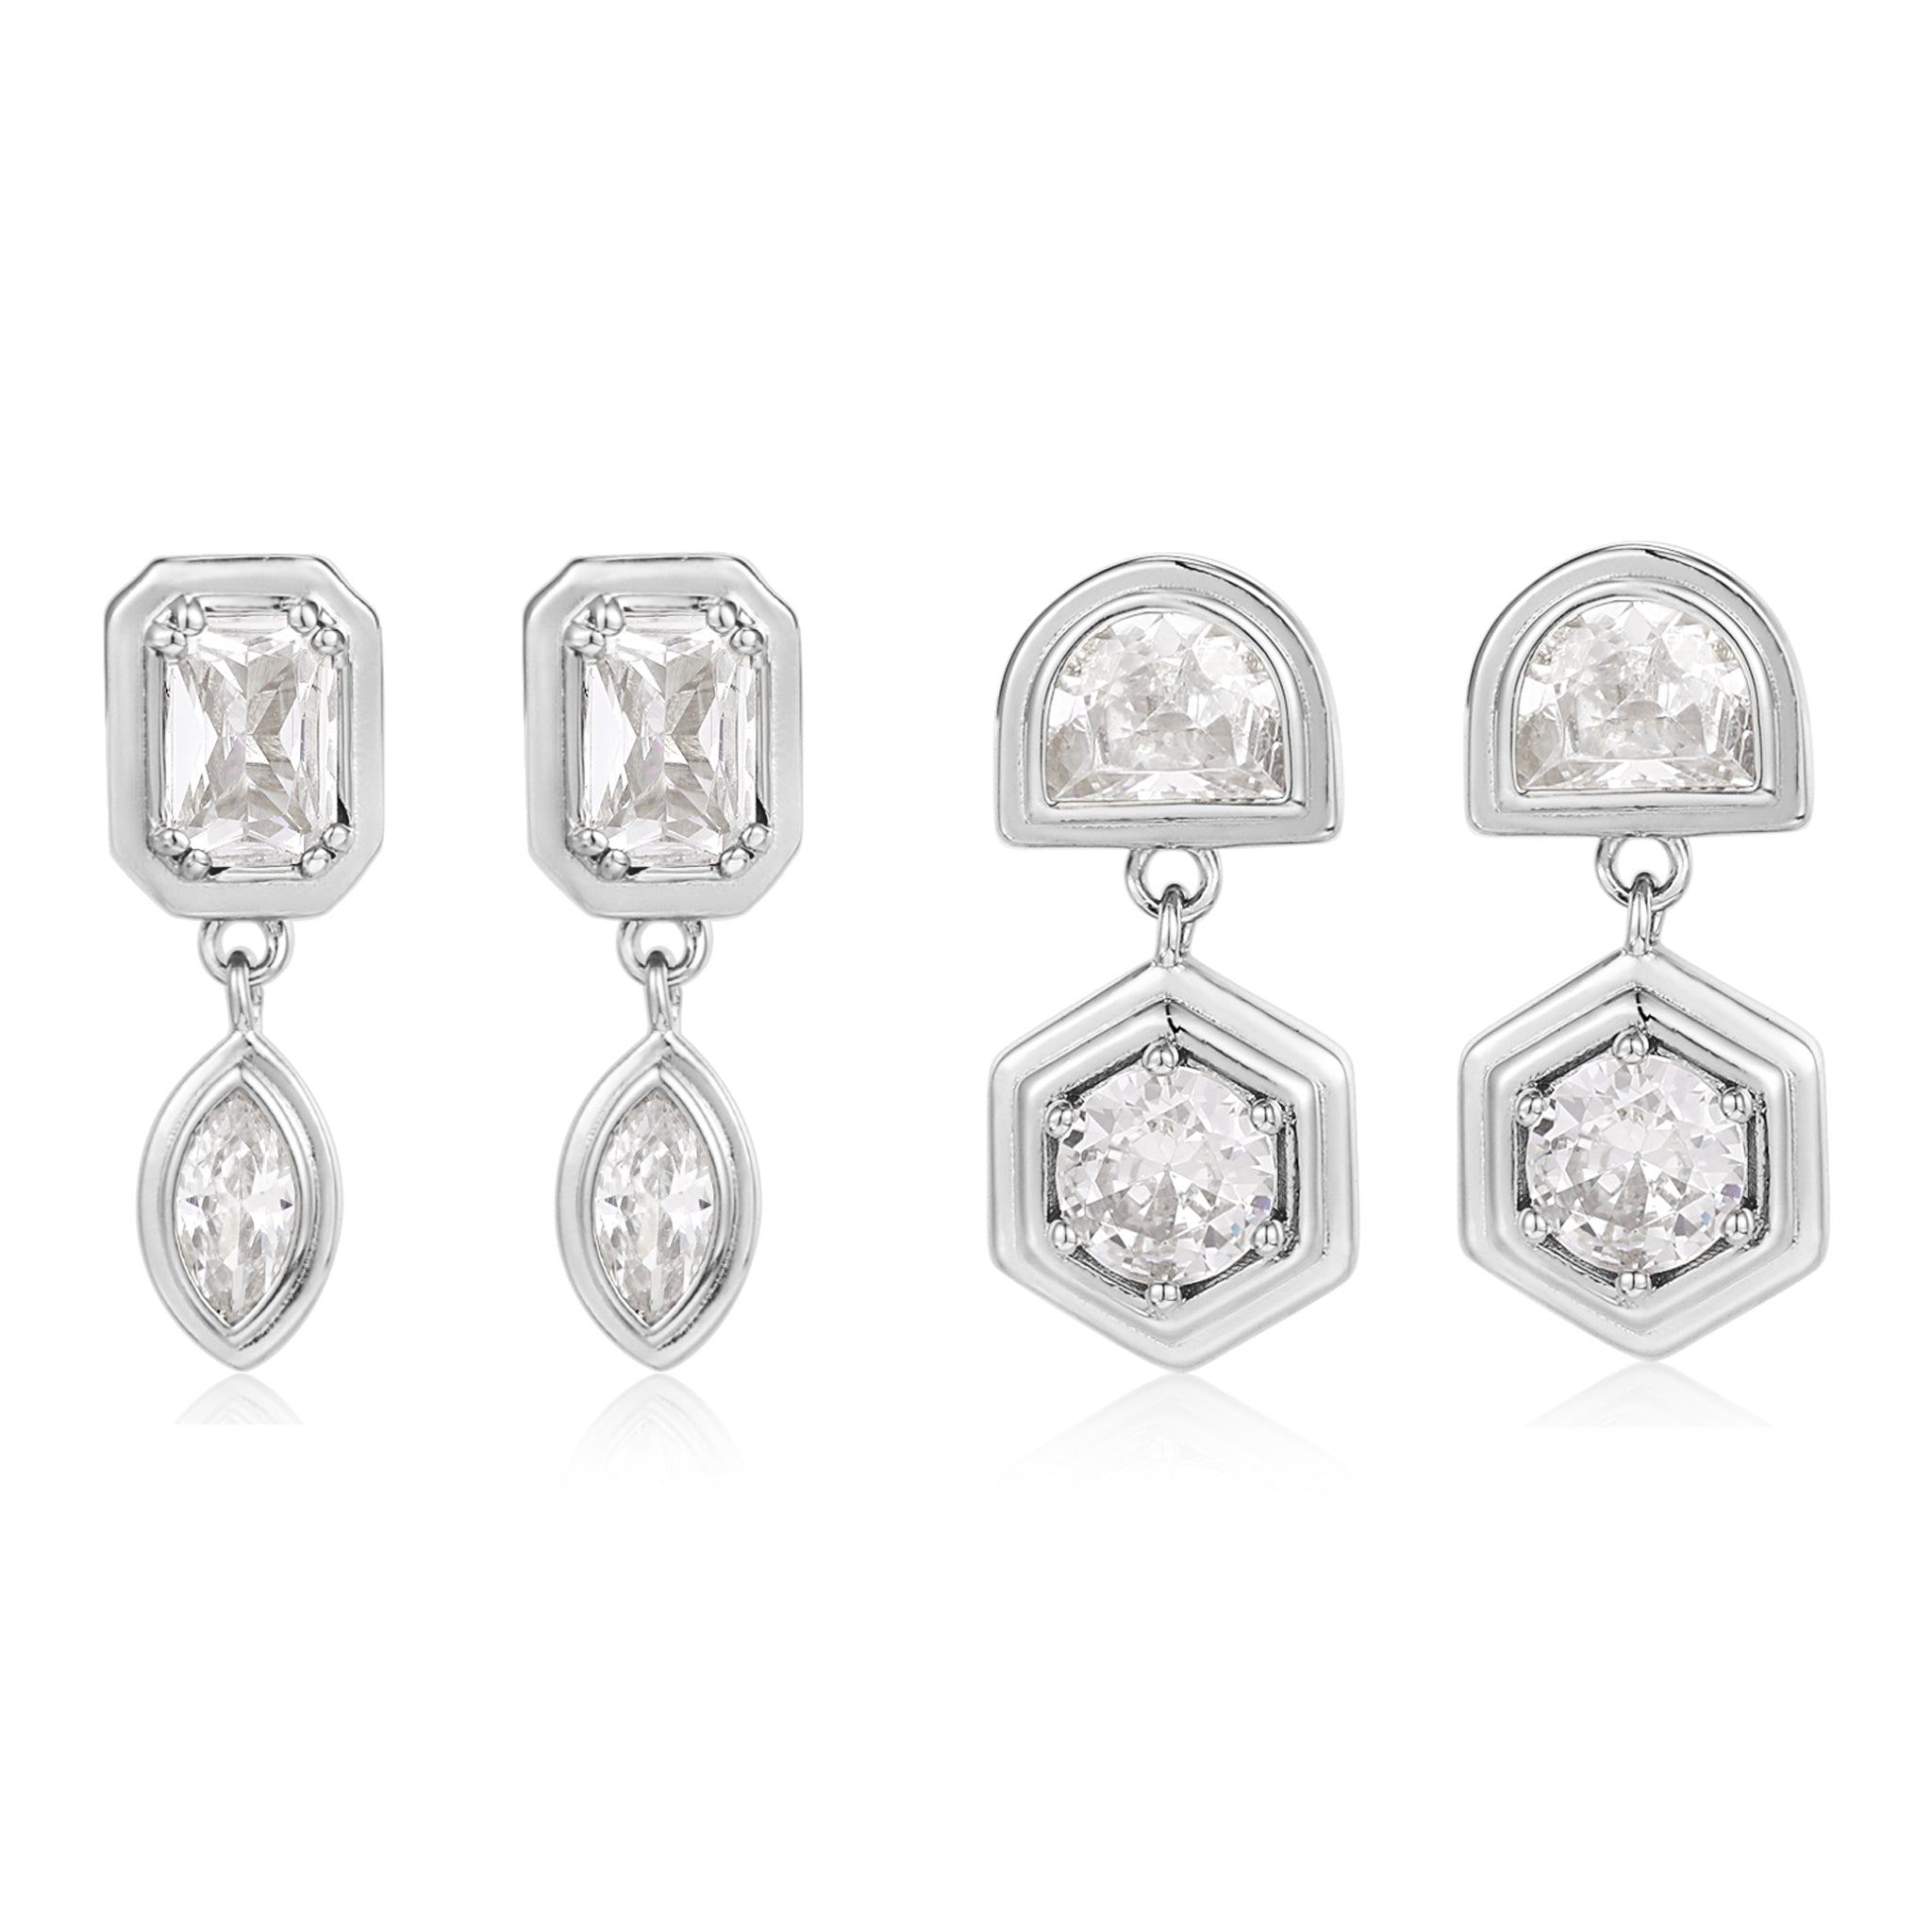 Luv Aj Stellar Bezel Stud Set of 4 Earrings in CZ and Polished Rhodium Plated